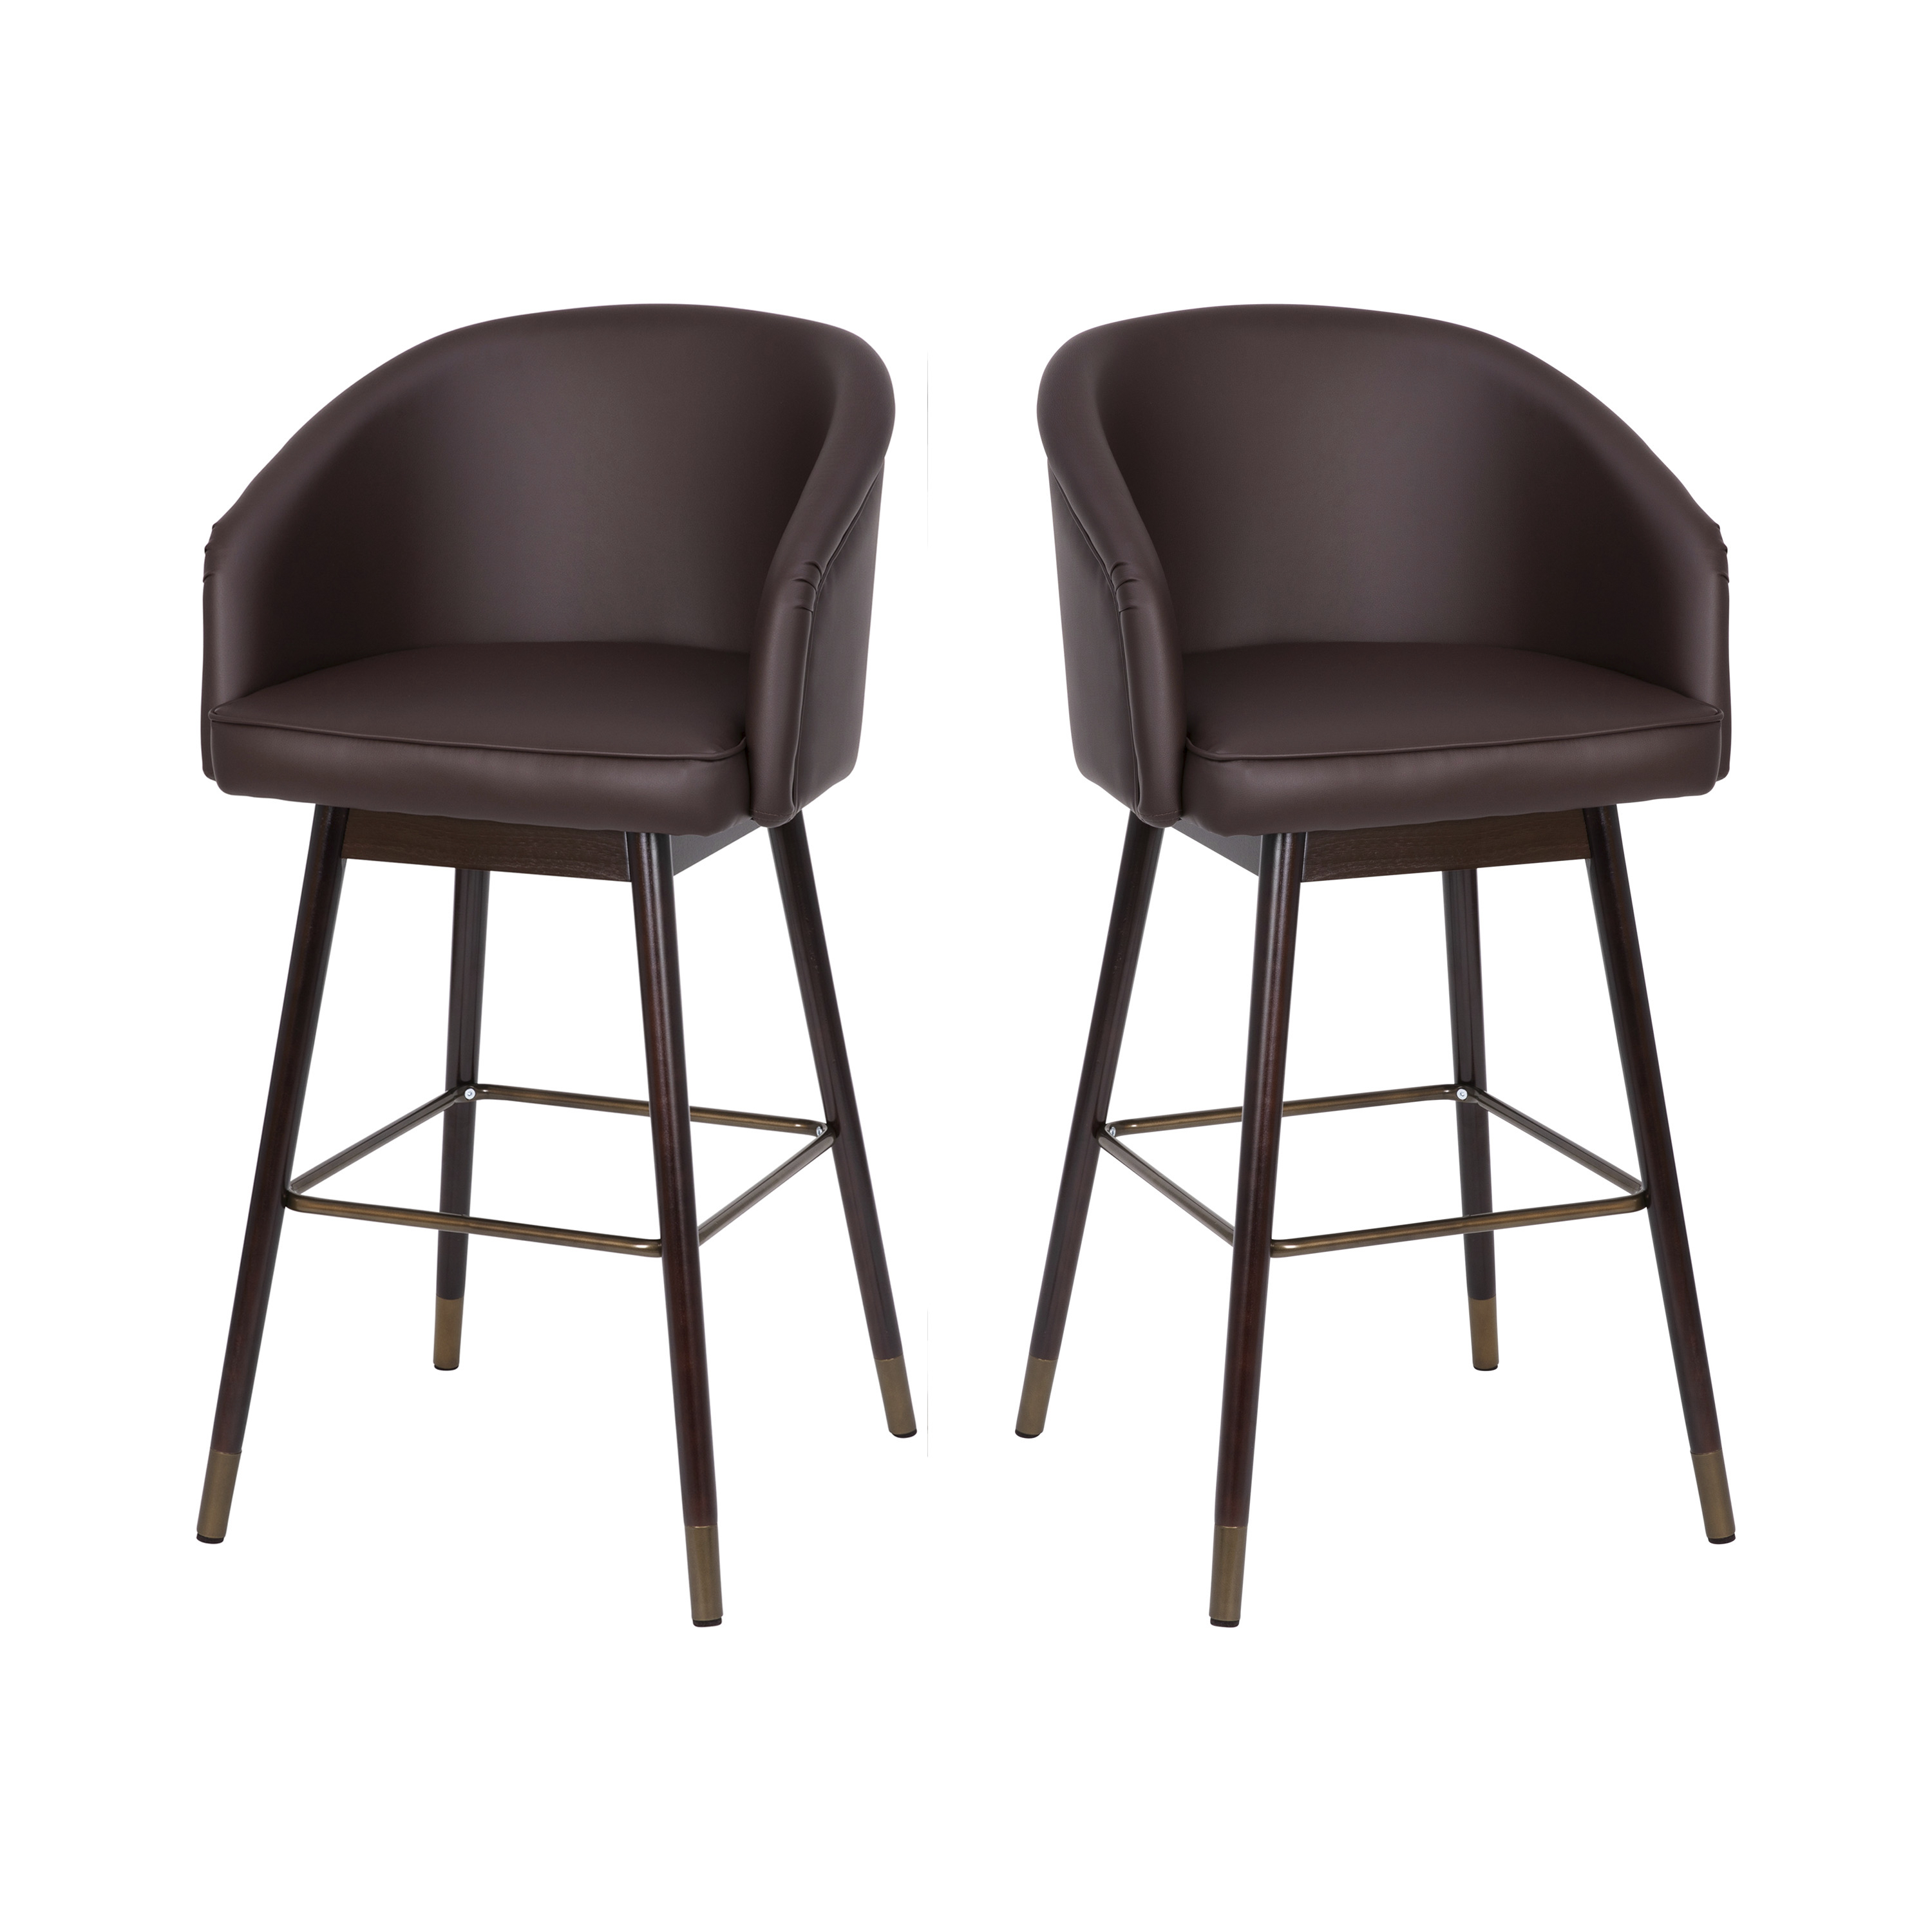 Flash Furniture 2-AY-1928-30-BR-GG Margo 30" Commercial Grade Mid-Back Brown LeatherSoft Modern Barstool with Beechwood Legs and Curved Back, Bronze Accents, Set of 2